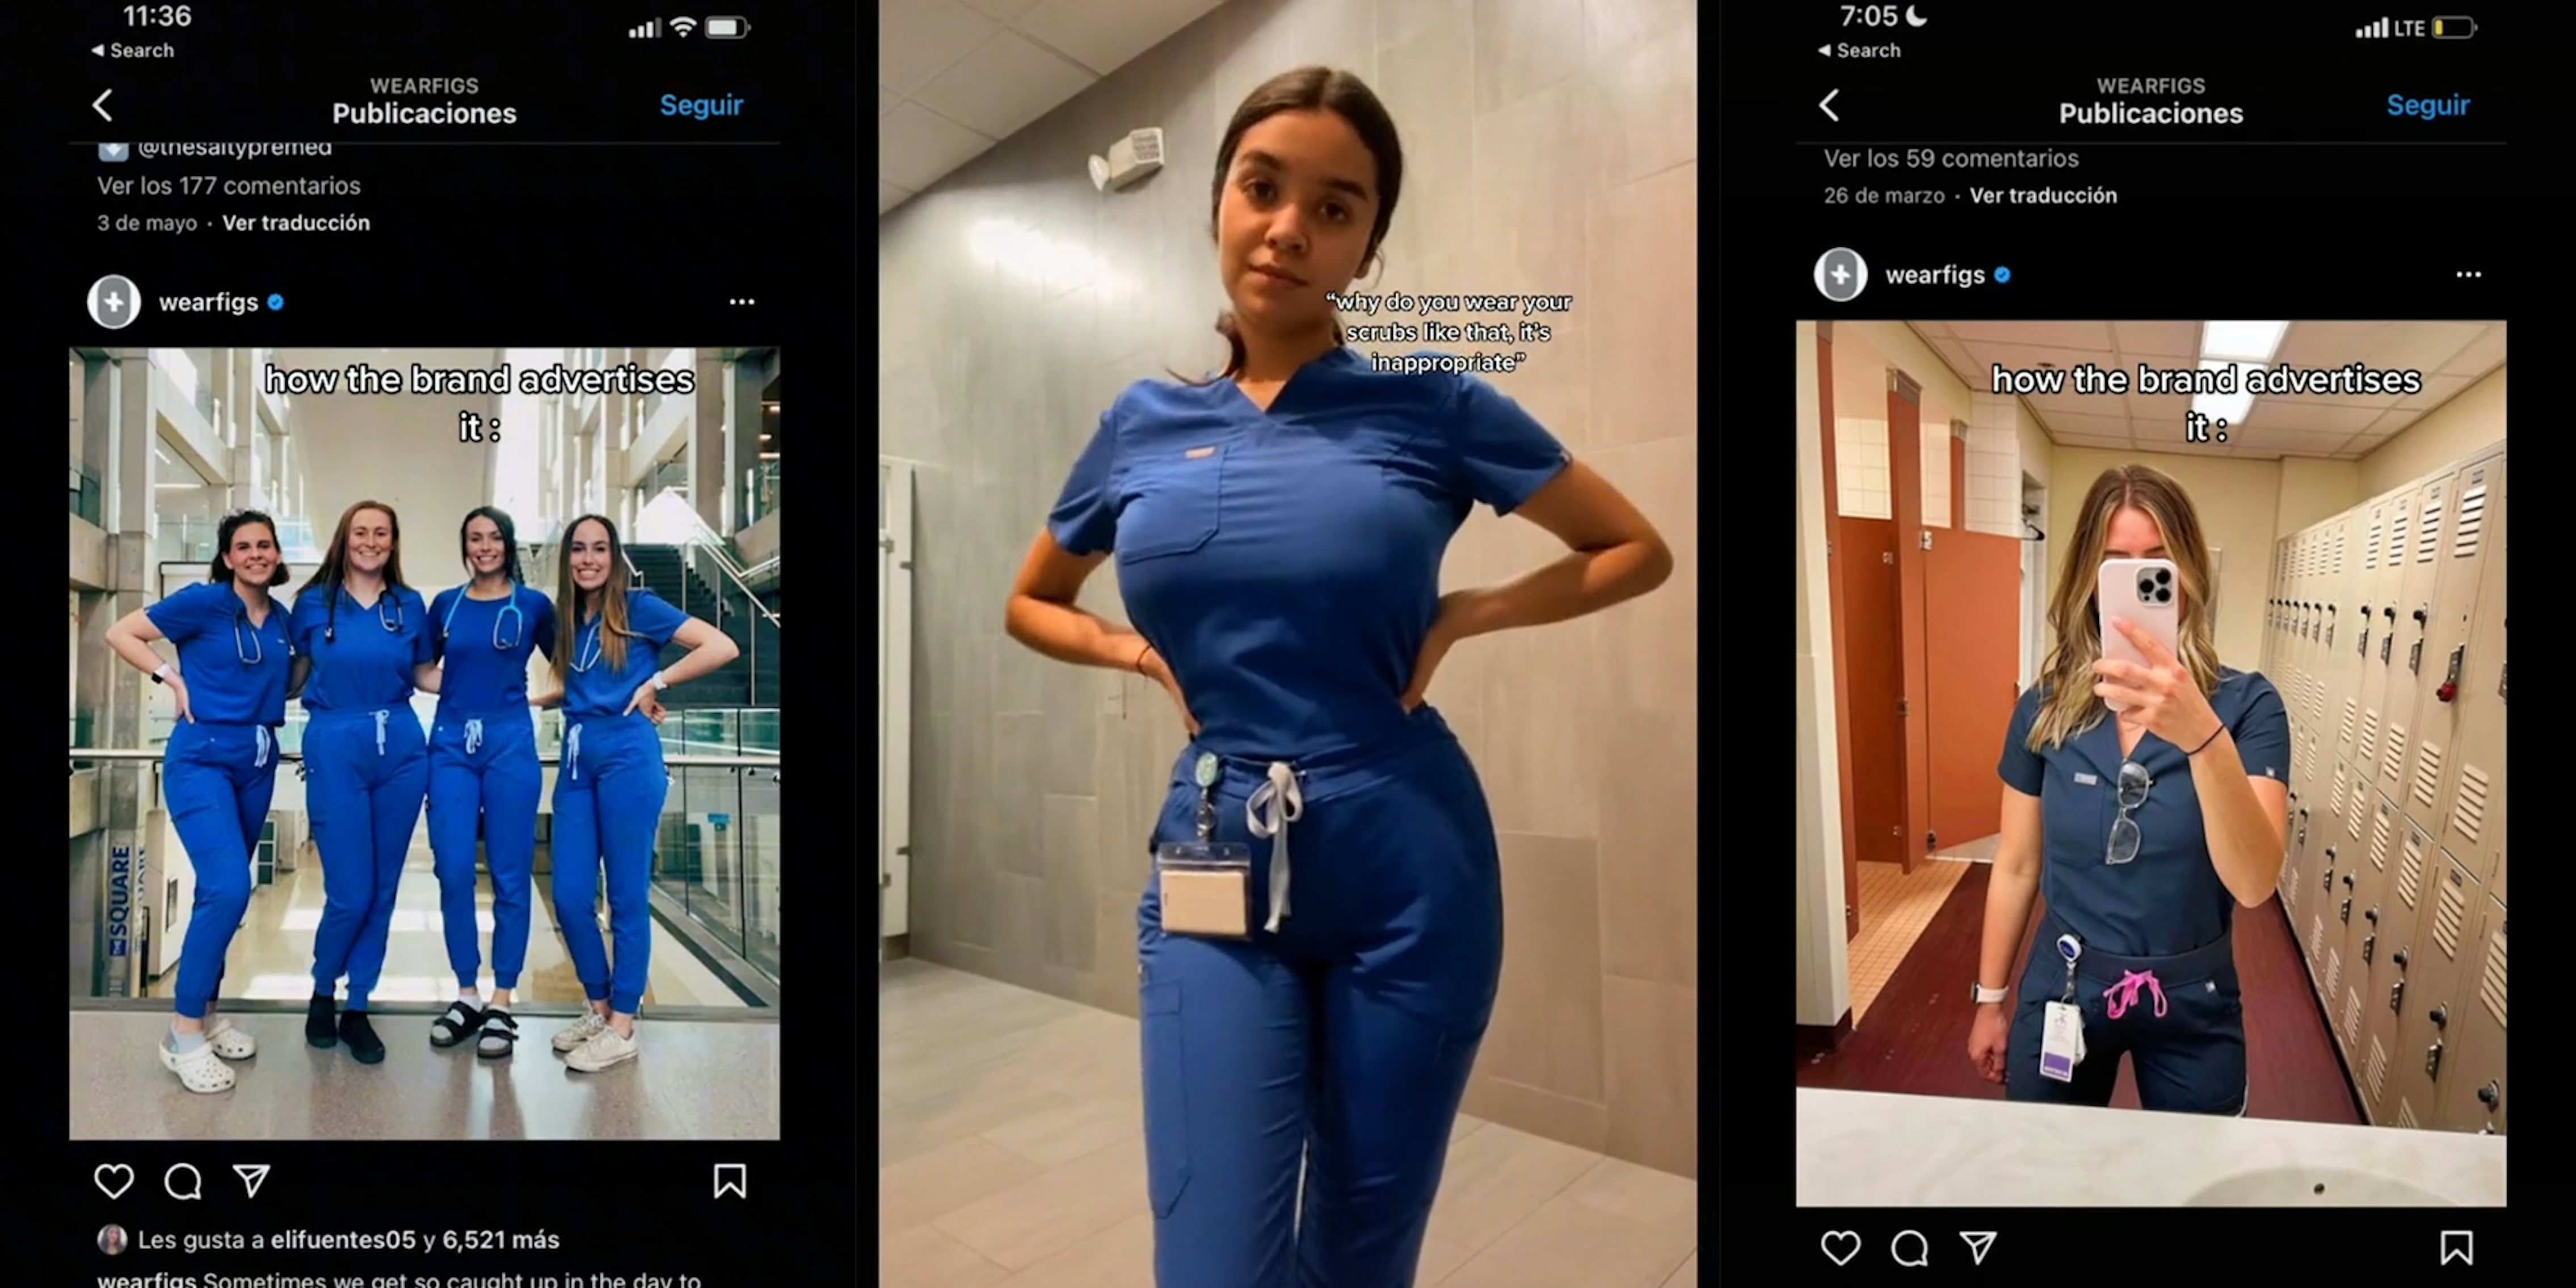 scrubs advertisement (l&r) woman wearing scrubs with caption 'why do you wear your scrubslike that, it's inappropriate' (c)